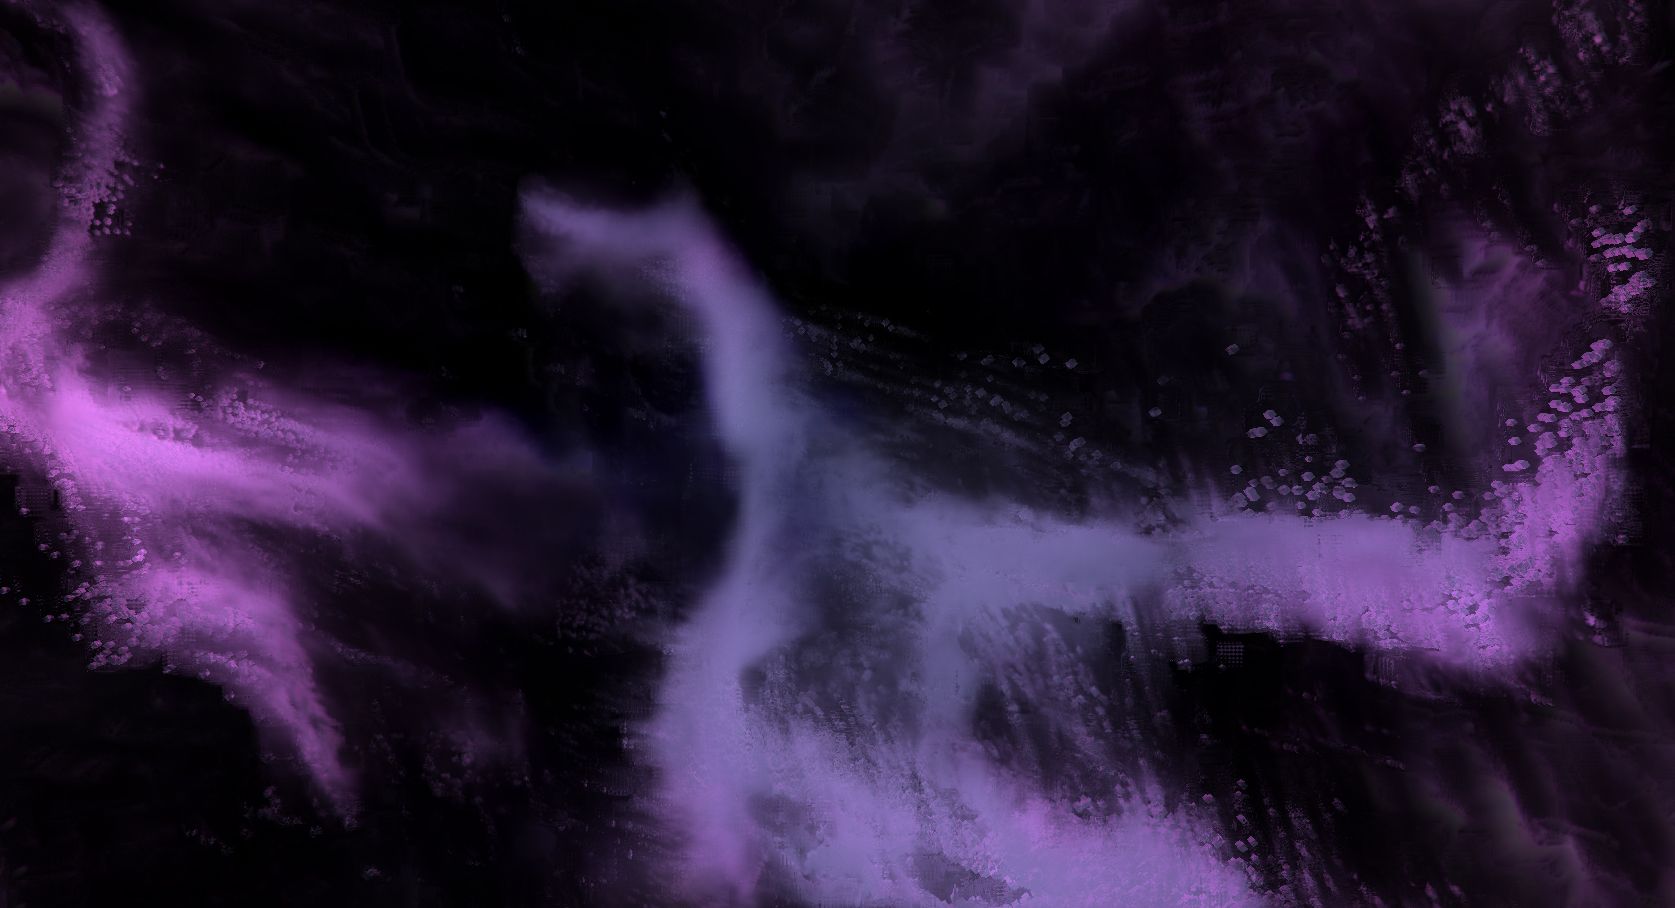 A frame extracted from Impasto video installation